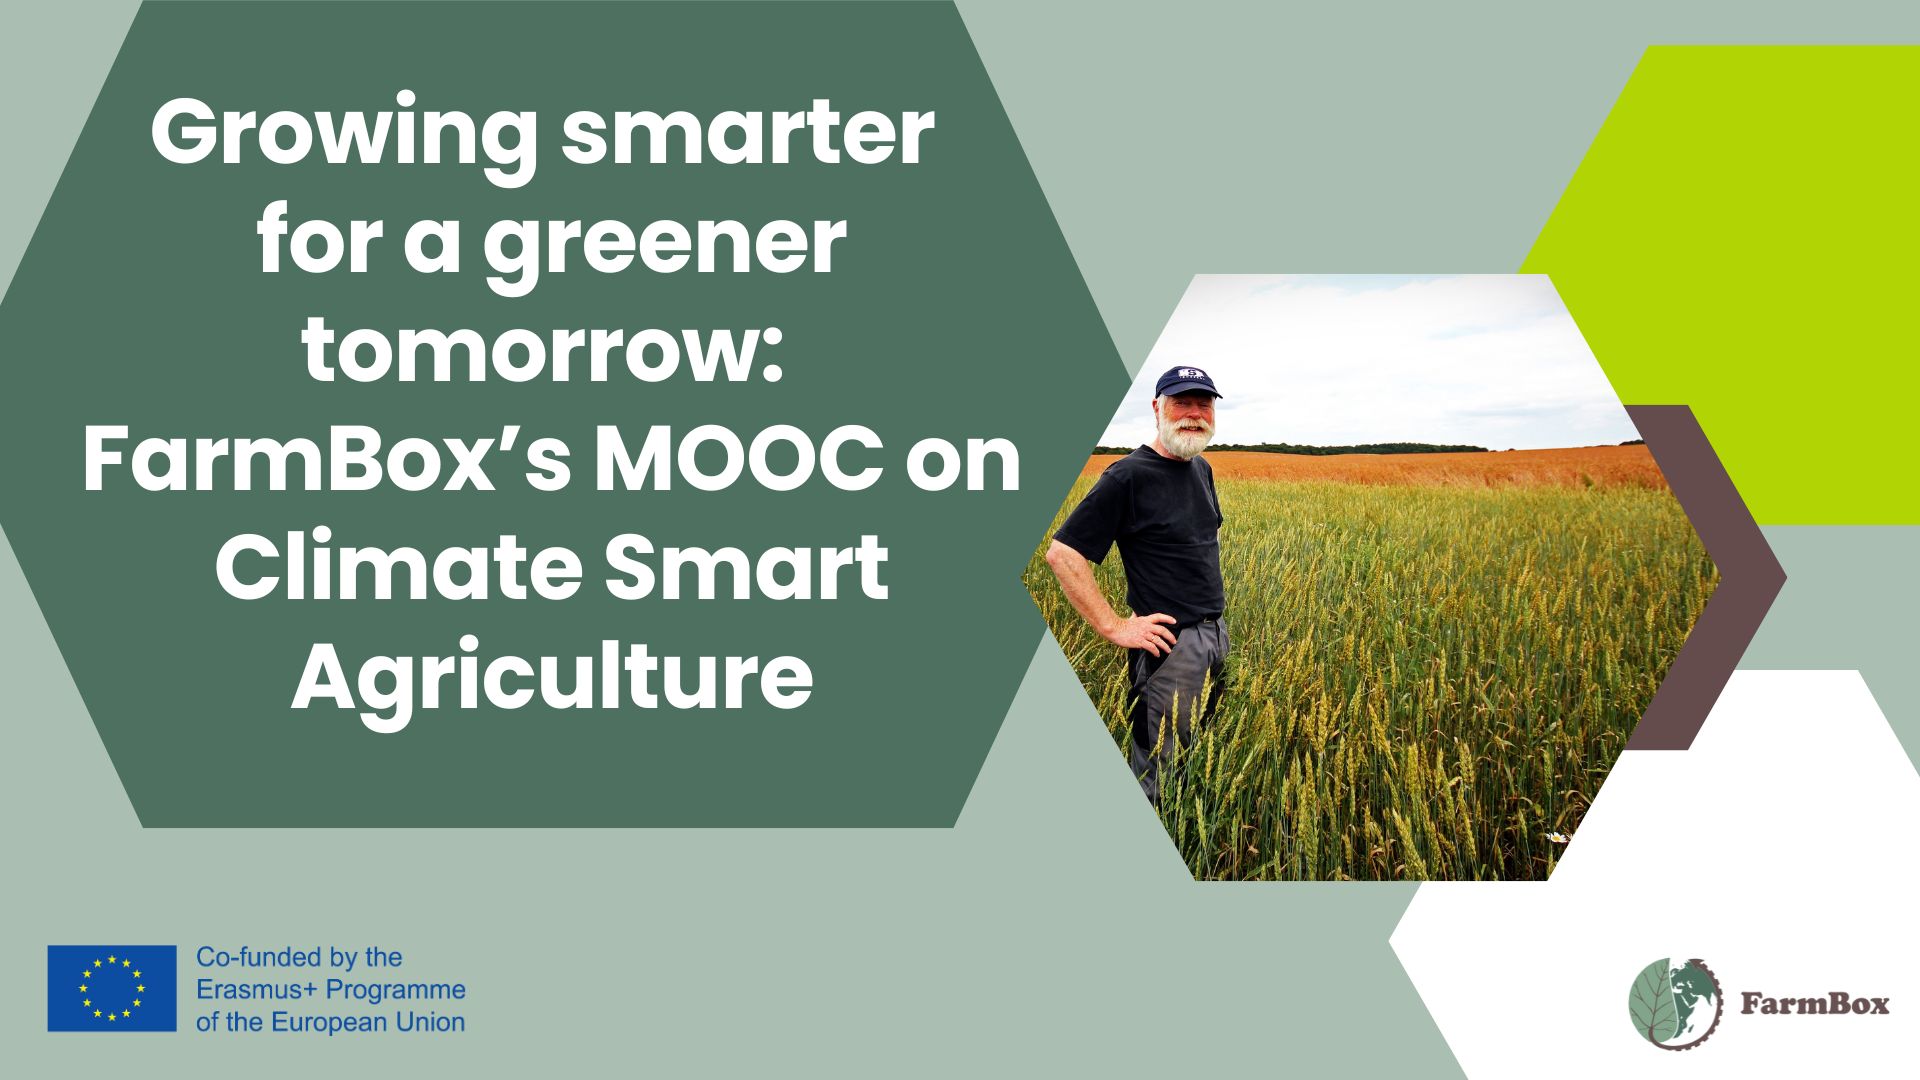 [CAPSTONE] Growing smarter for a greener tomorrow: FarmBox’s MOOC on Climate Smart Agriculture